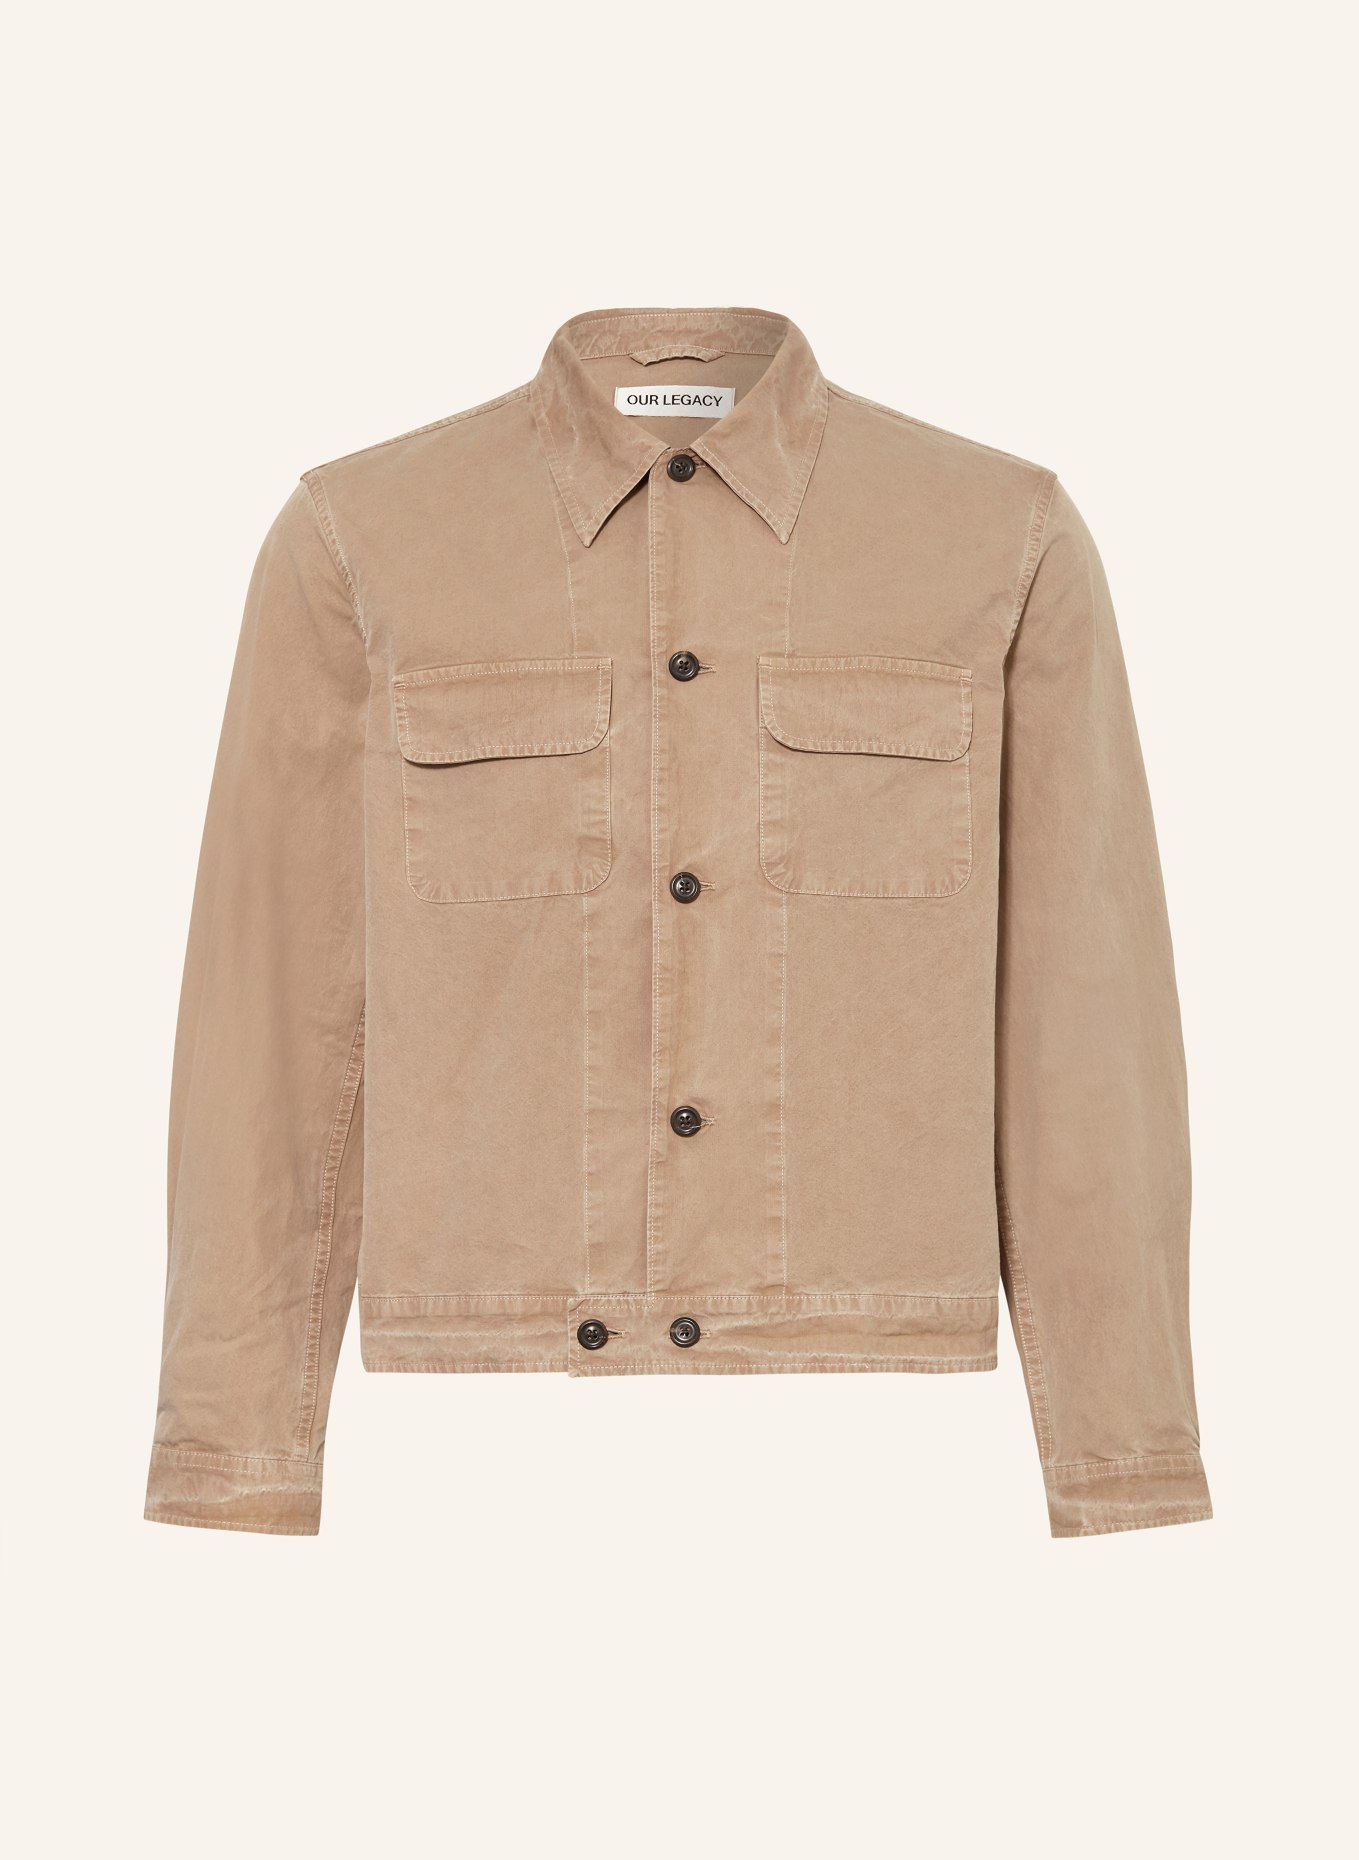 OUR LEGACY Overjacket COACH, Farbe: BEIGE (Bild 1)